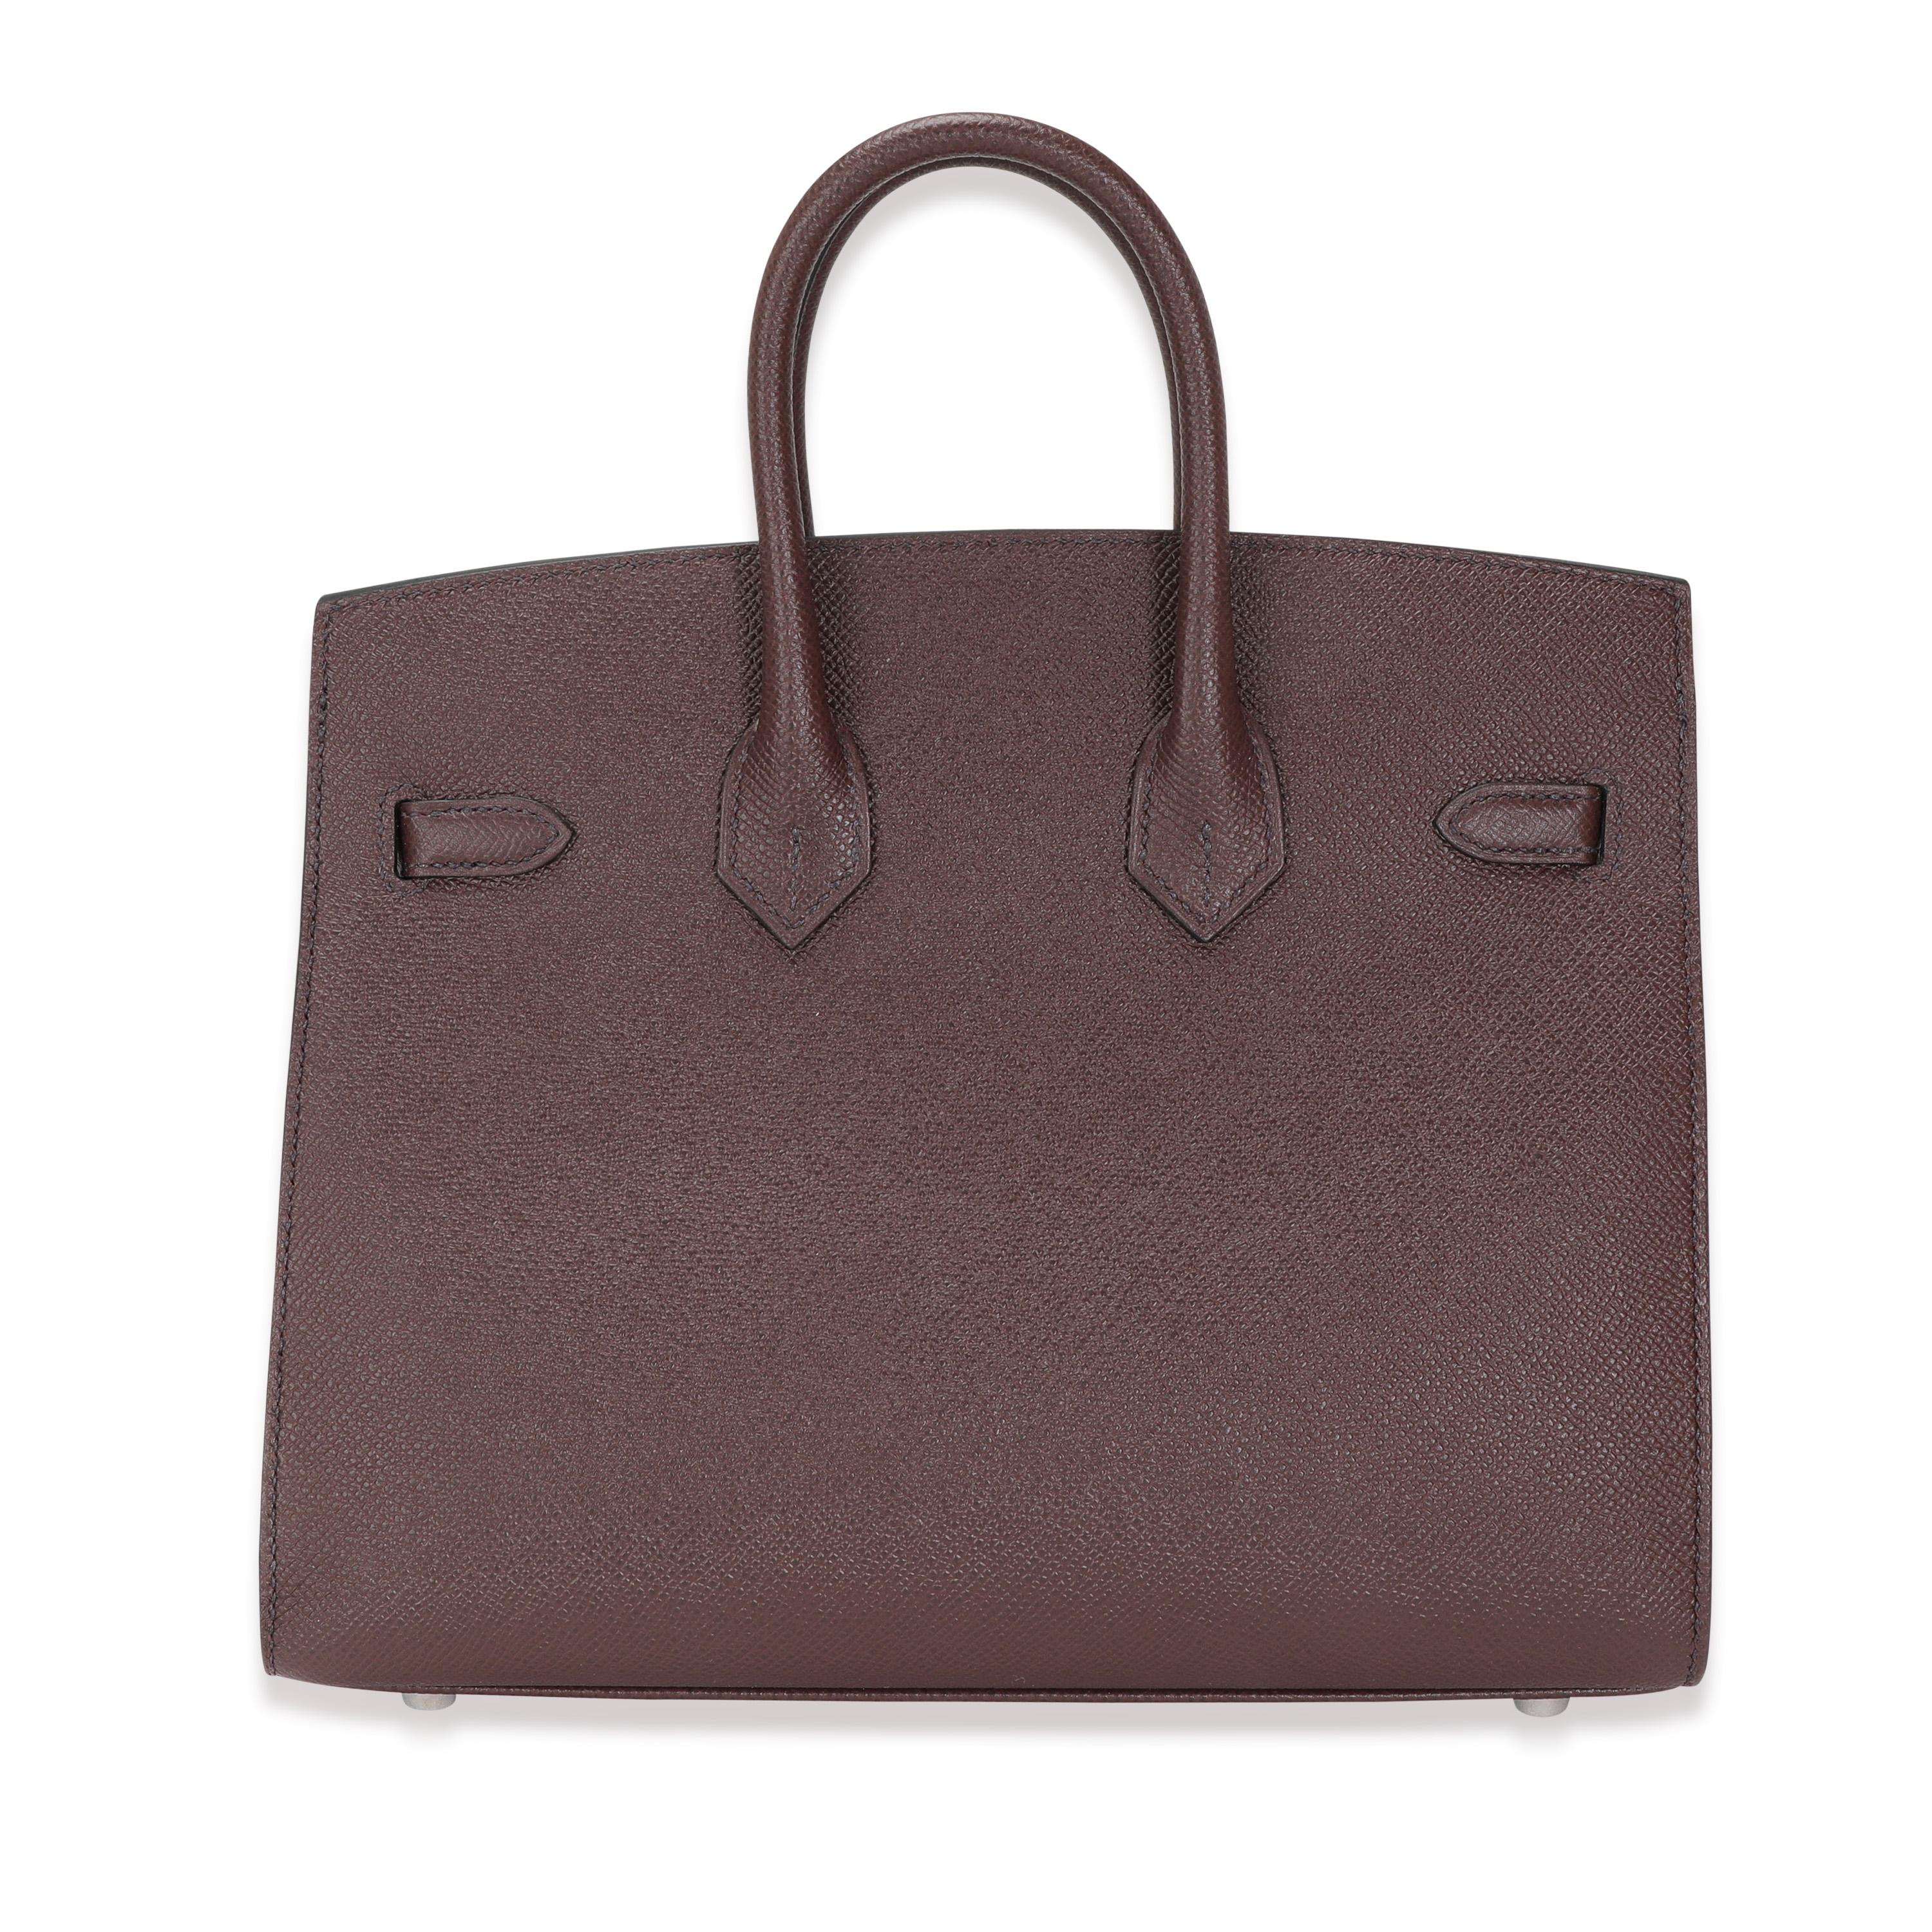 Listing Title: NIB Hermès Rouge Sellier Epsom Sellier Birkin 25 PHW
SKU: 118717
Condition: Pre-owned (3000)
Handbag Condition: Mint
Condition Comments: Mint Condition. Plastic on hardware. No visible signs of wear. Final sale.
Brand: Hermès
Model: